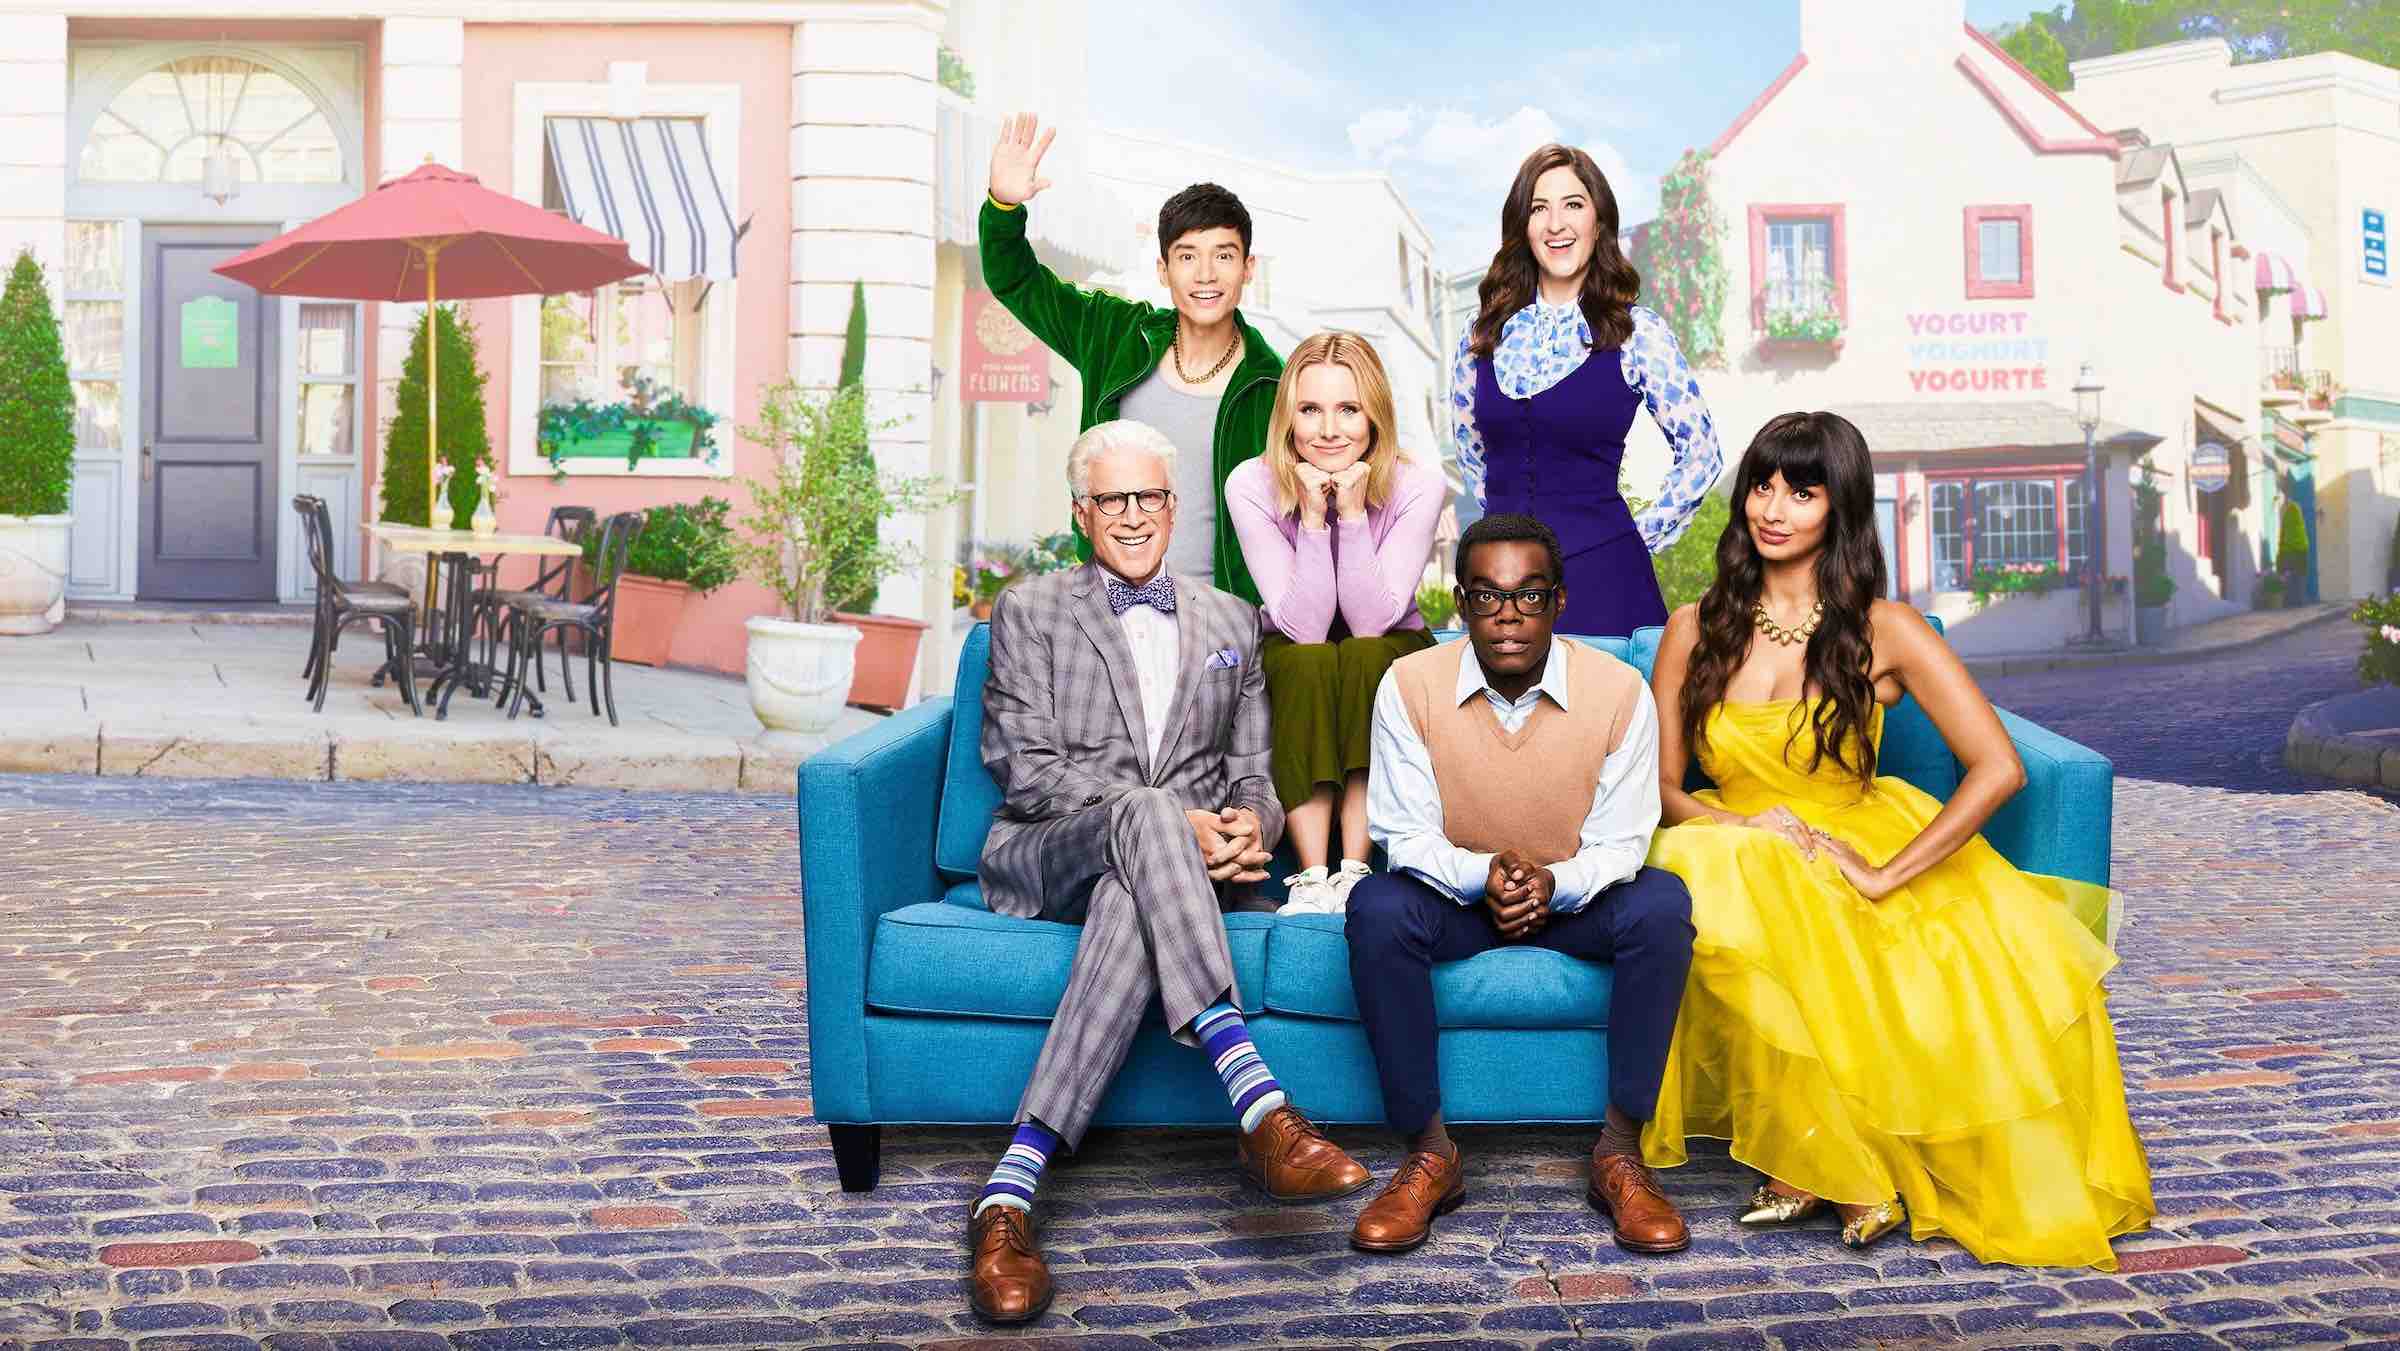 After all the Bad Place drama, 'The Good Place' season 4 ep. 6 "A Chip Driver Mystery" is back on its usual bullshirt about its humans improving.